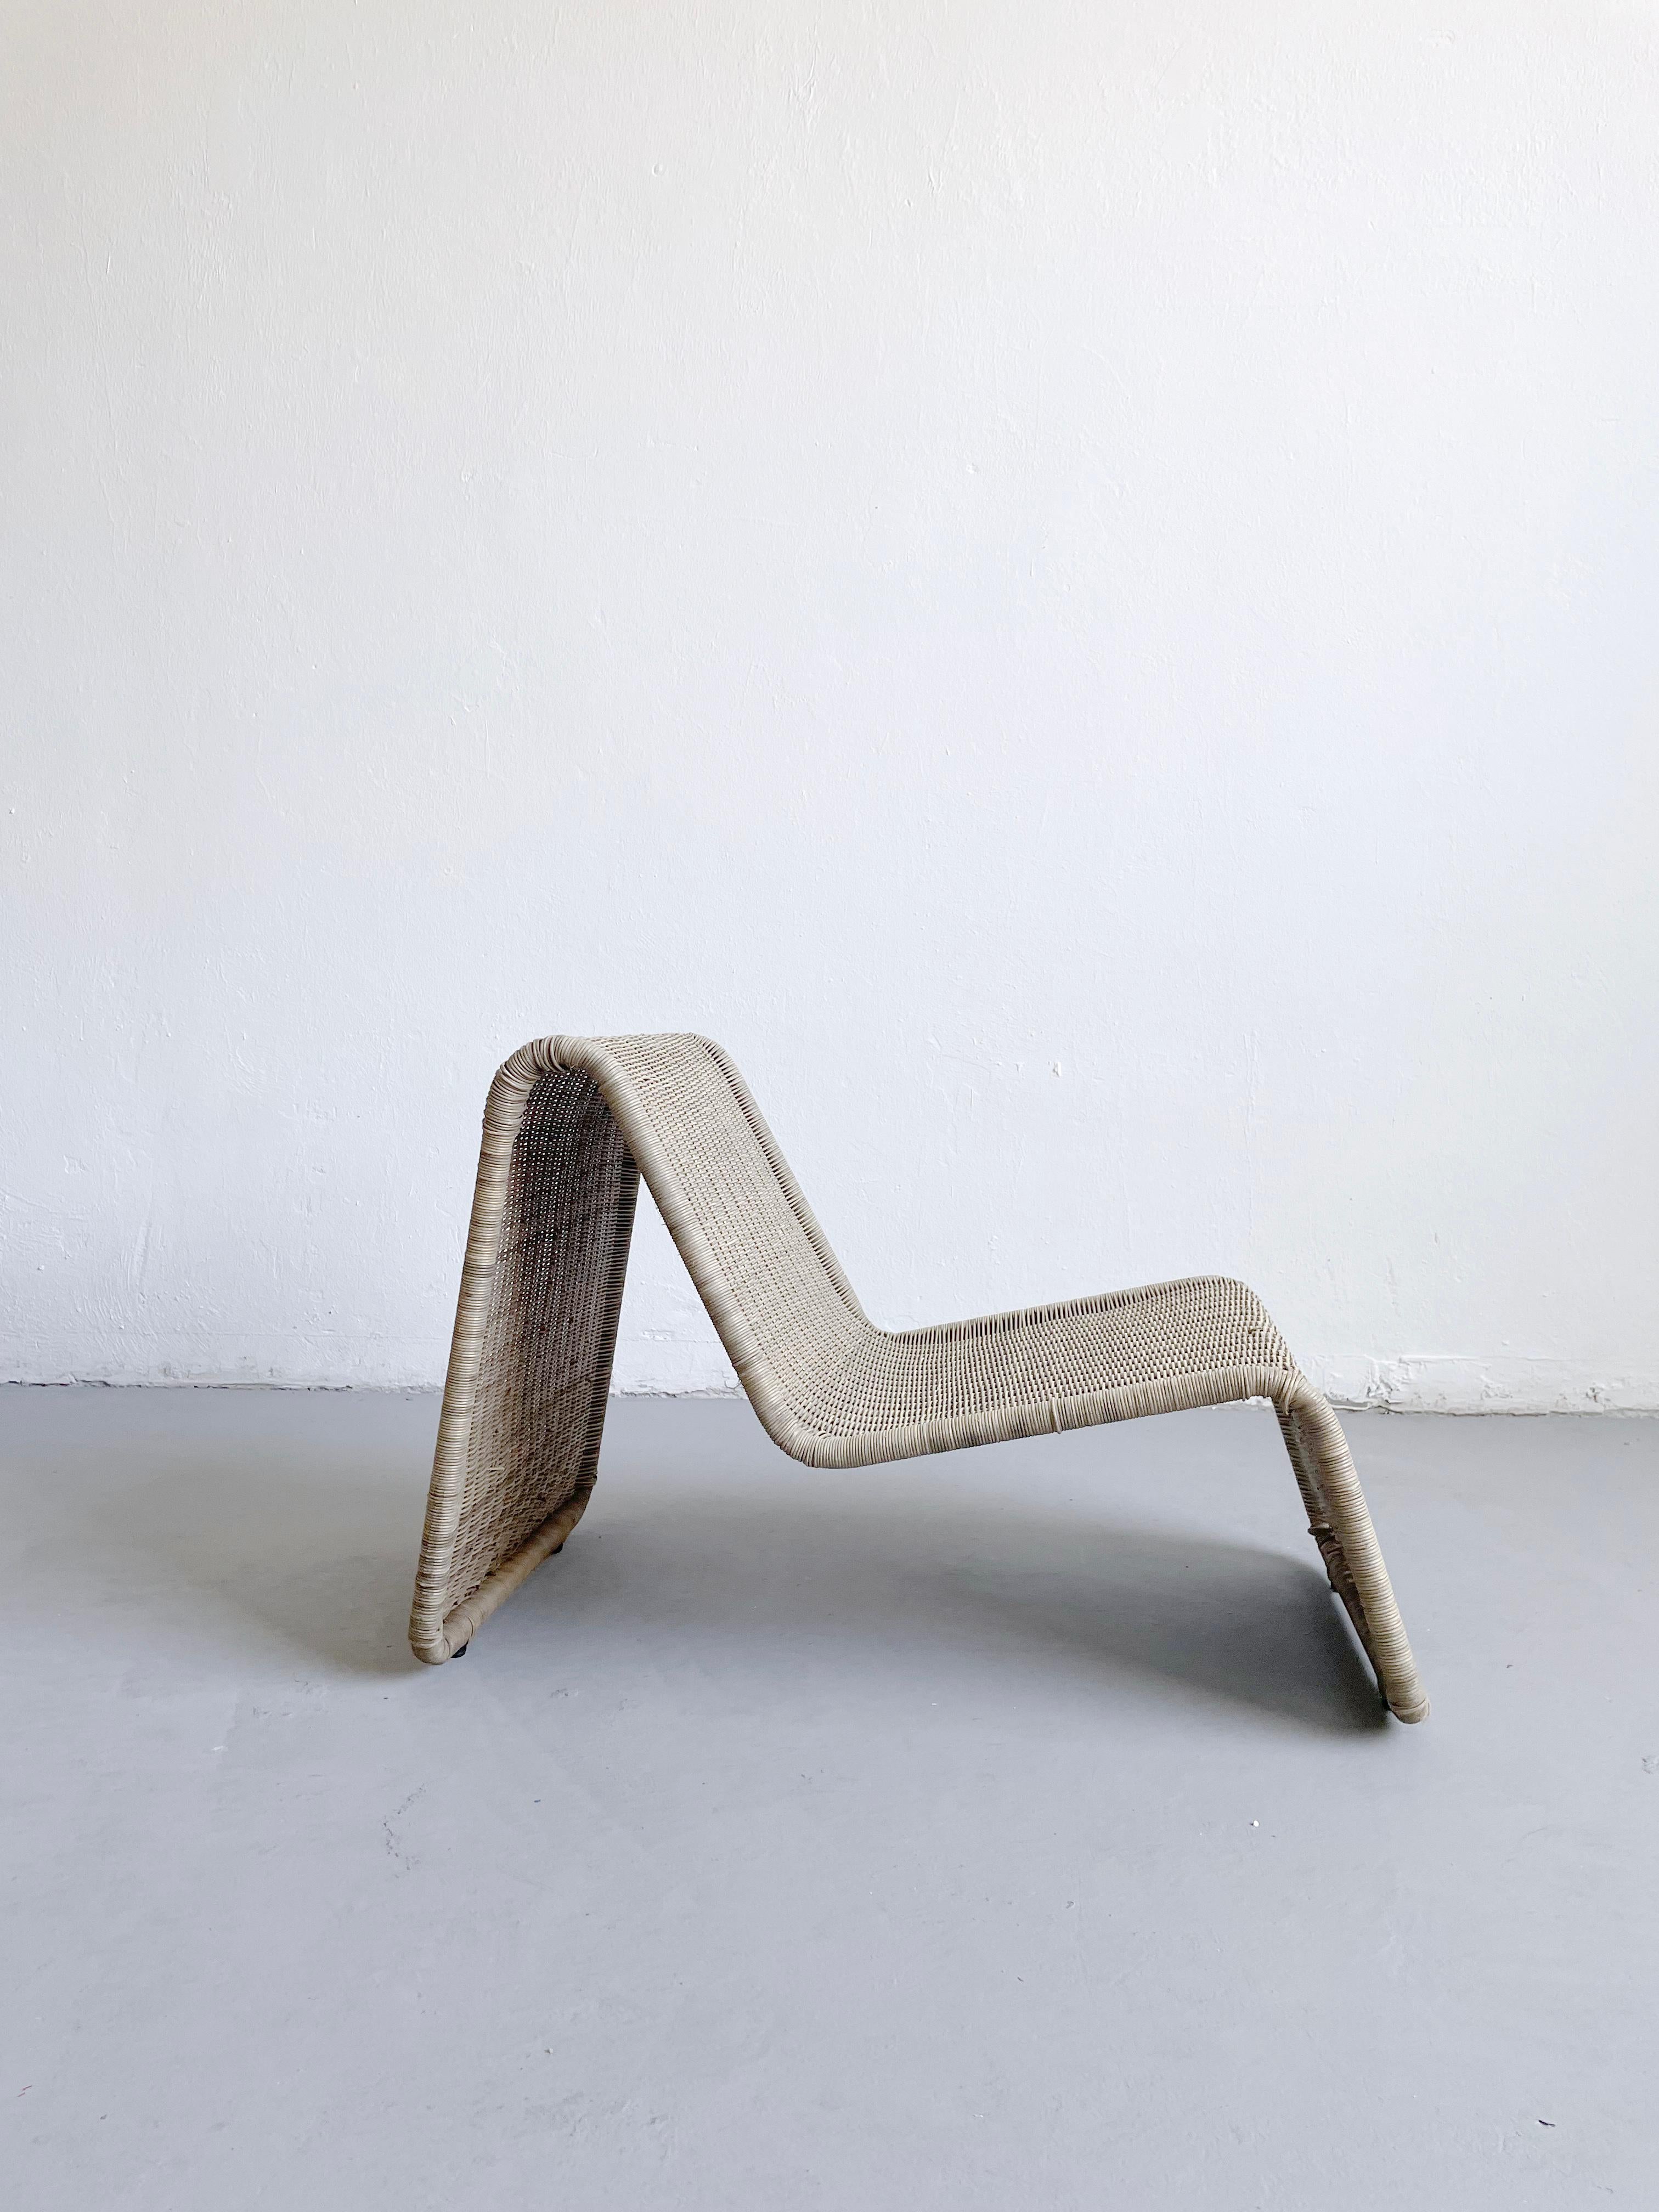 Minimalist, organic, sculptural, and iconic vintage wicker lounge chair manufactured by IKEA in the 1980s. 
The design of the chair is almost an identical copy of the 1960s P3 lounge chair by notable Italian designer Tito Agnoli. 

The chair offered